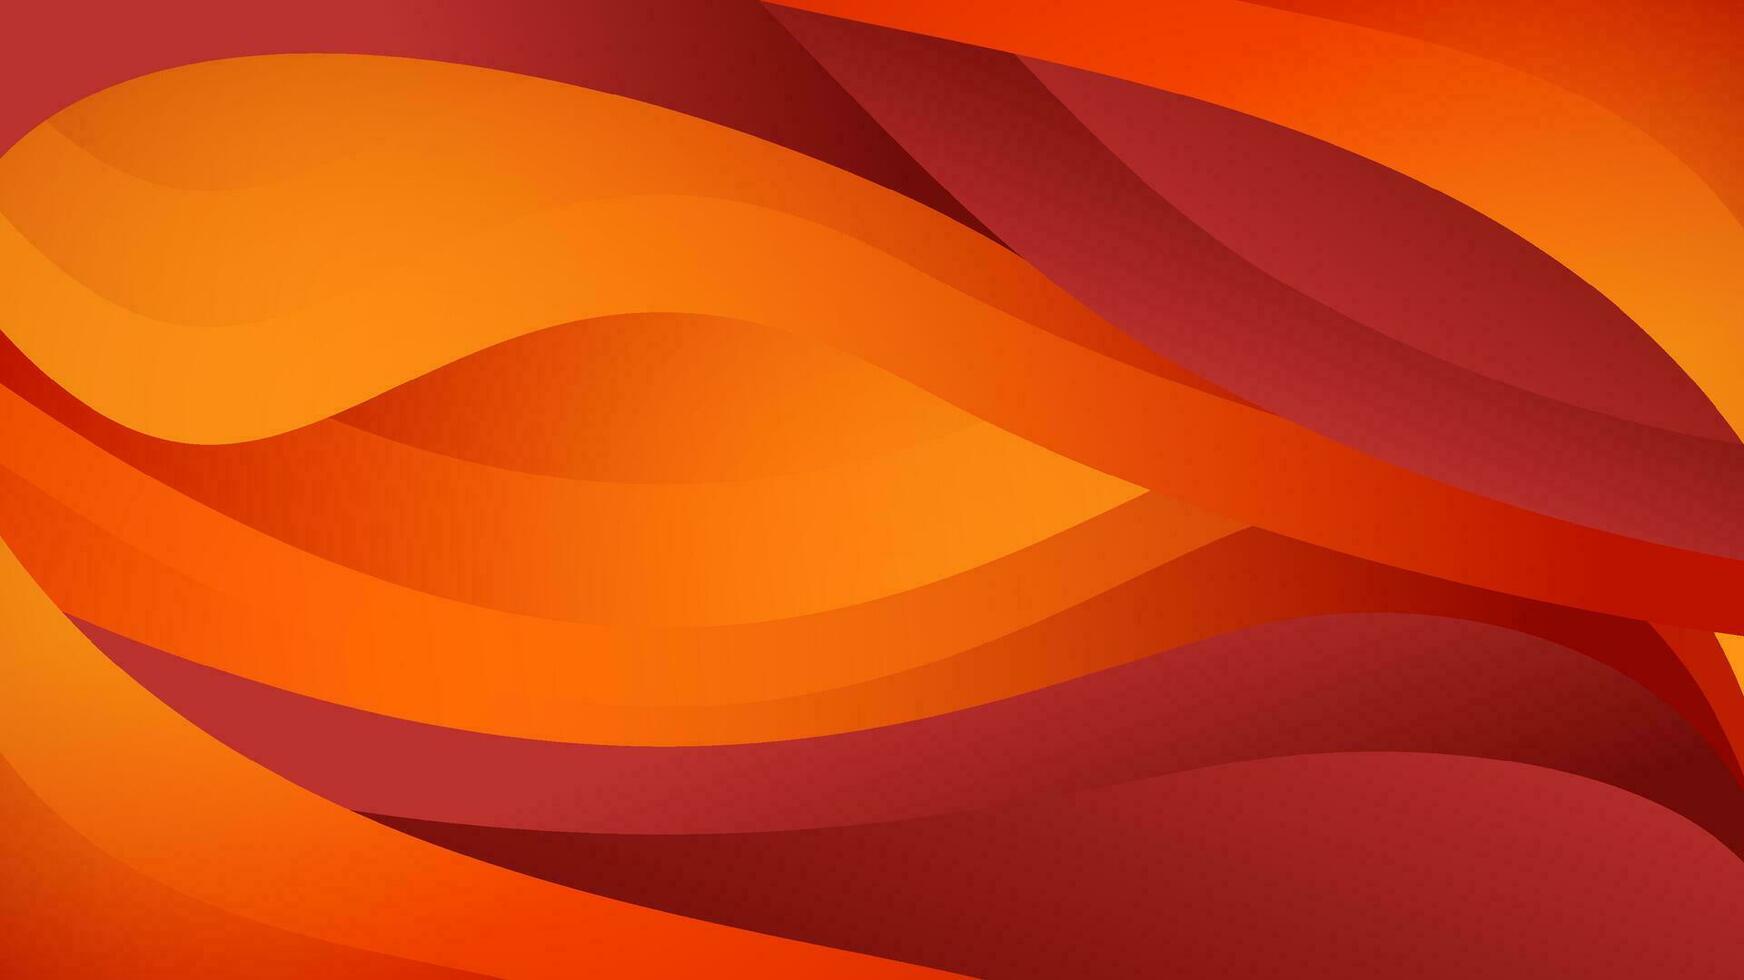 orange abstract modern background. autumn abstract theme design. Suitable for posters, banners, flyers, business, corporate, covers, vector